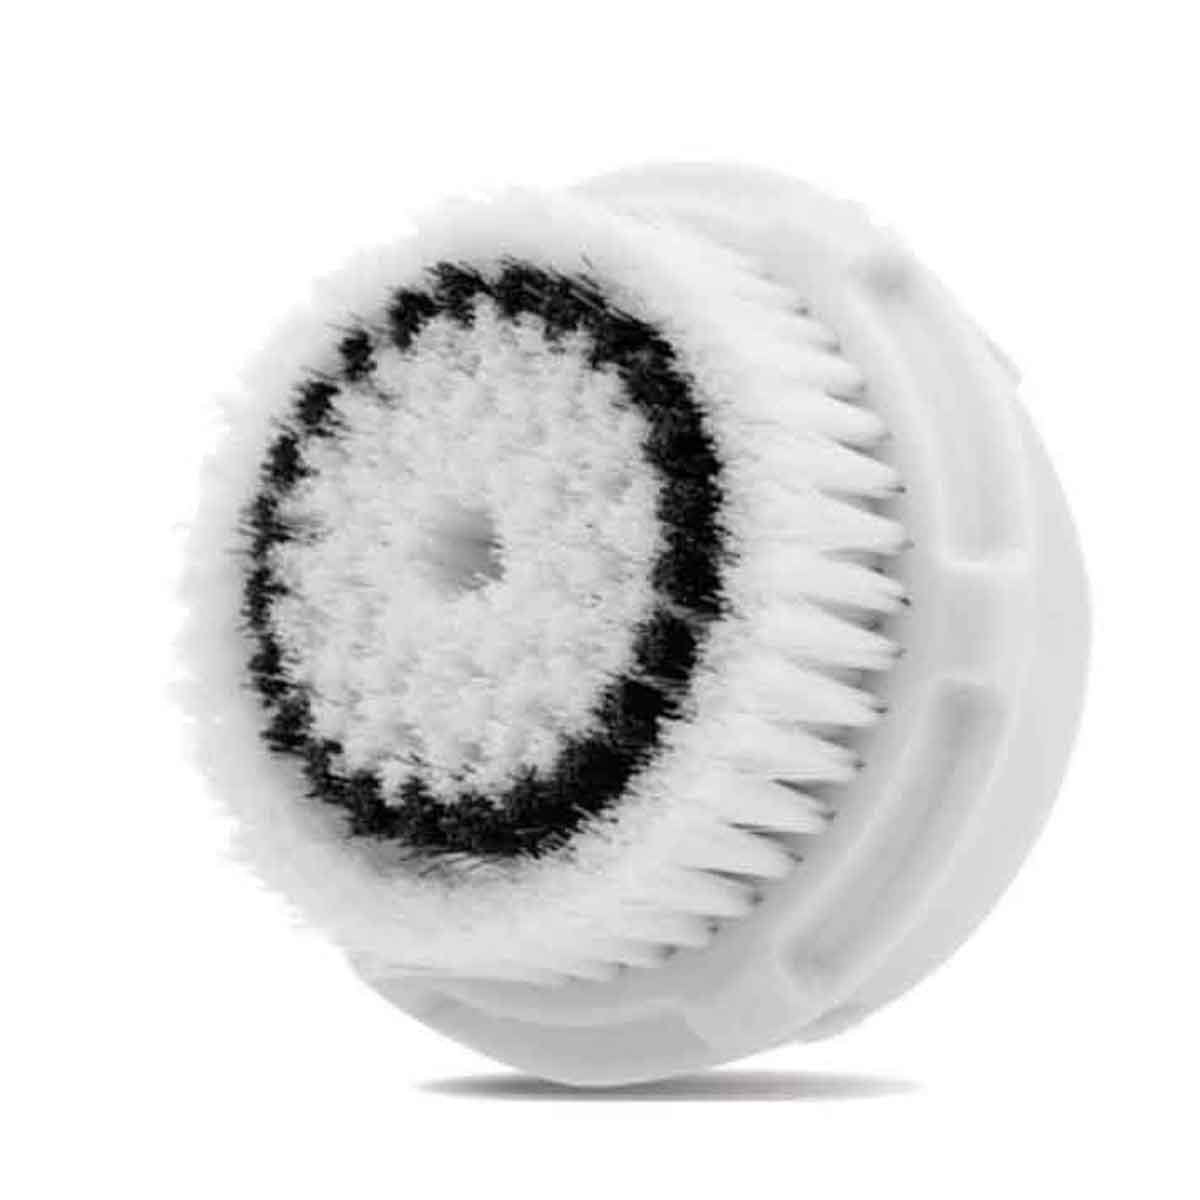 Replacement Brush Heads for Clarisonic Products - Sensitive Brush Head